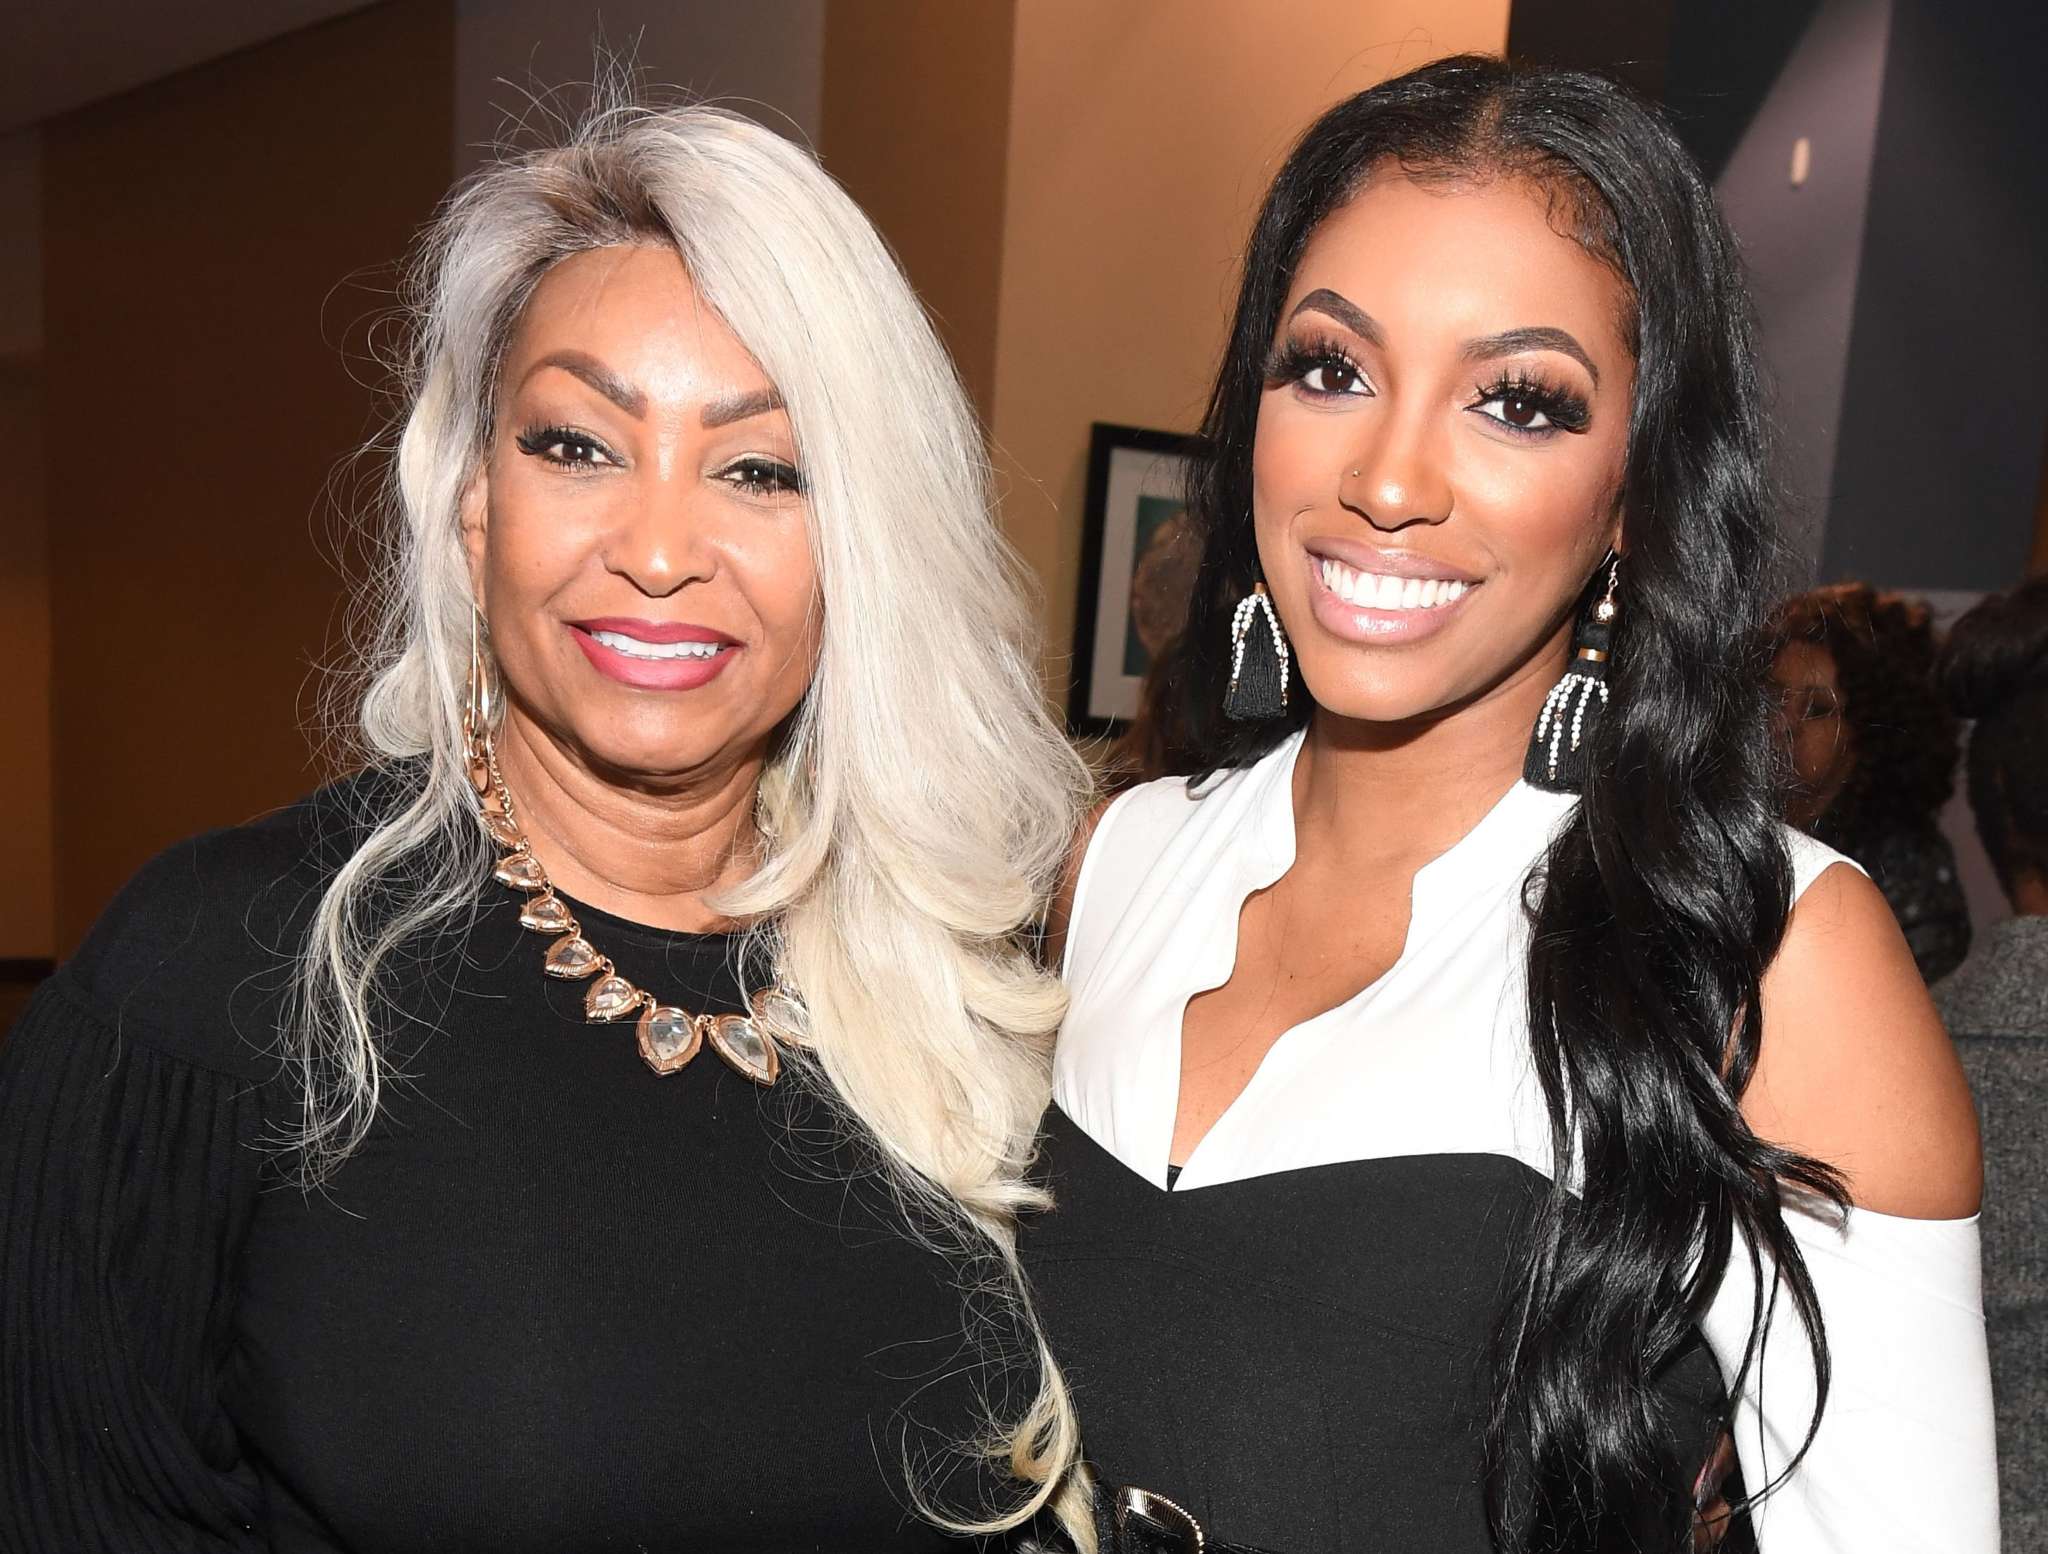 Porsha Williams Drops An Exciting Announcement Involving Her Sister, Lauren And Mother, Diane - See Her Post